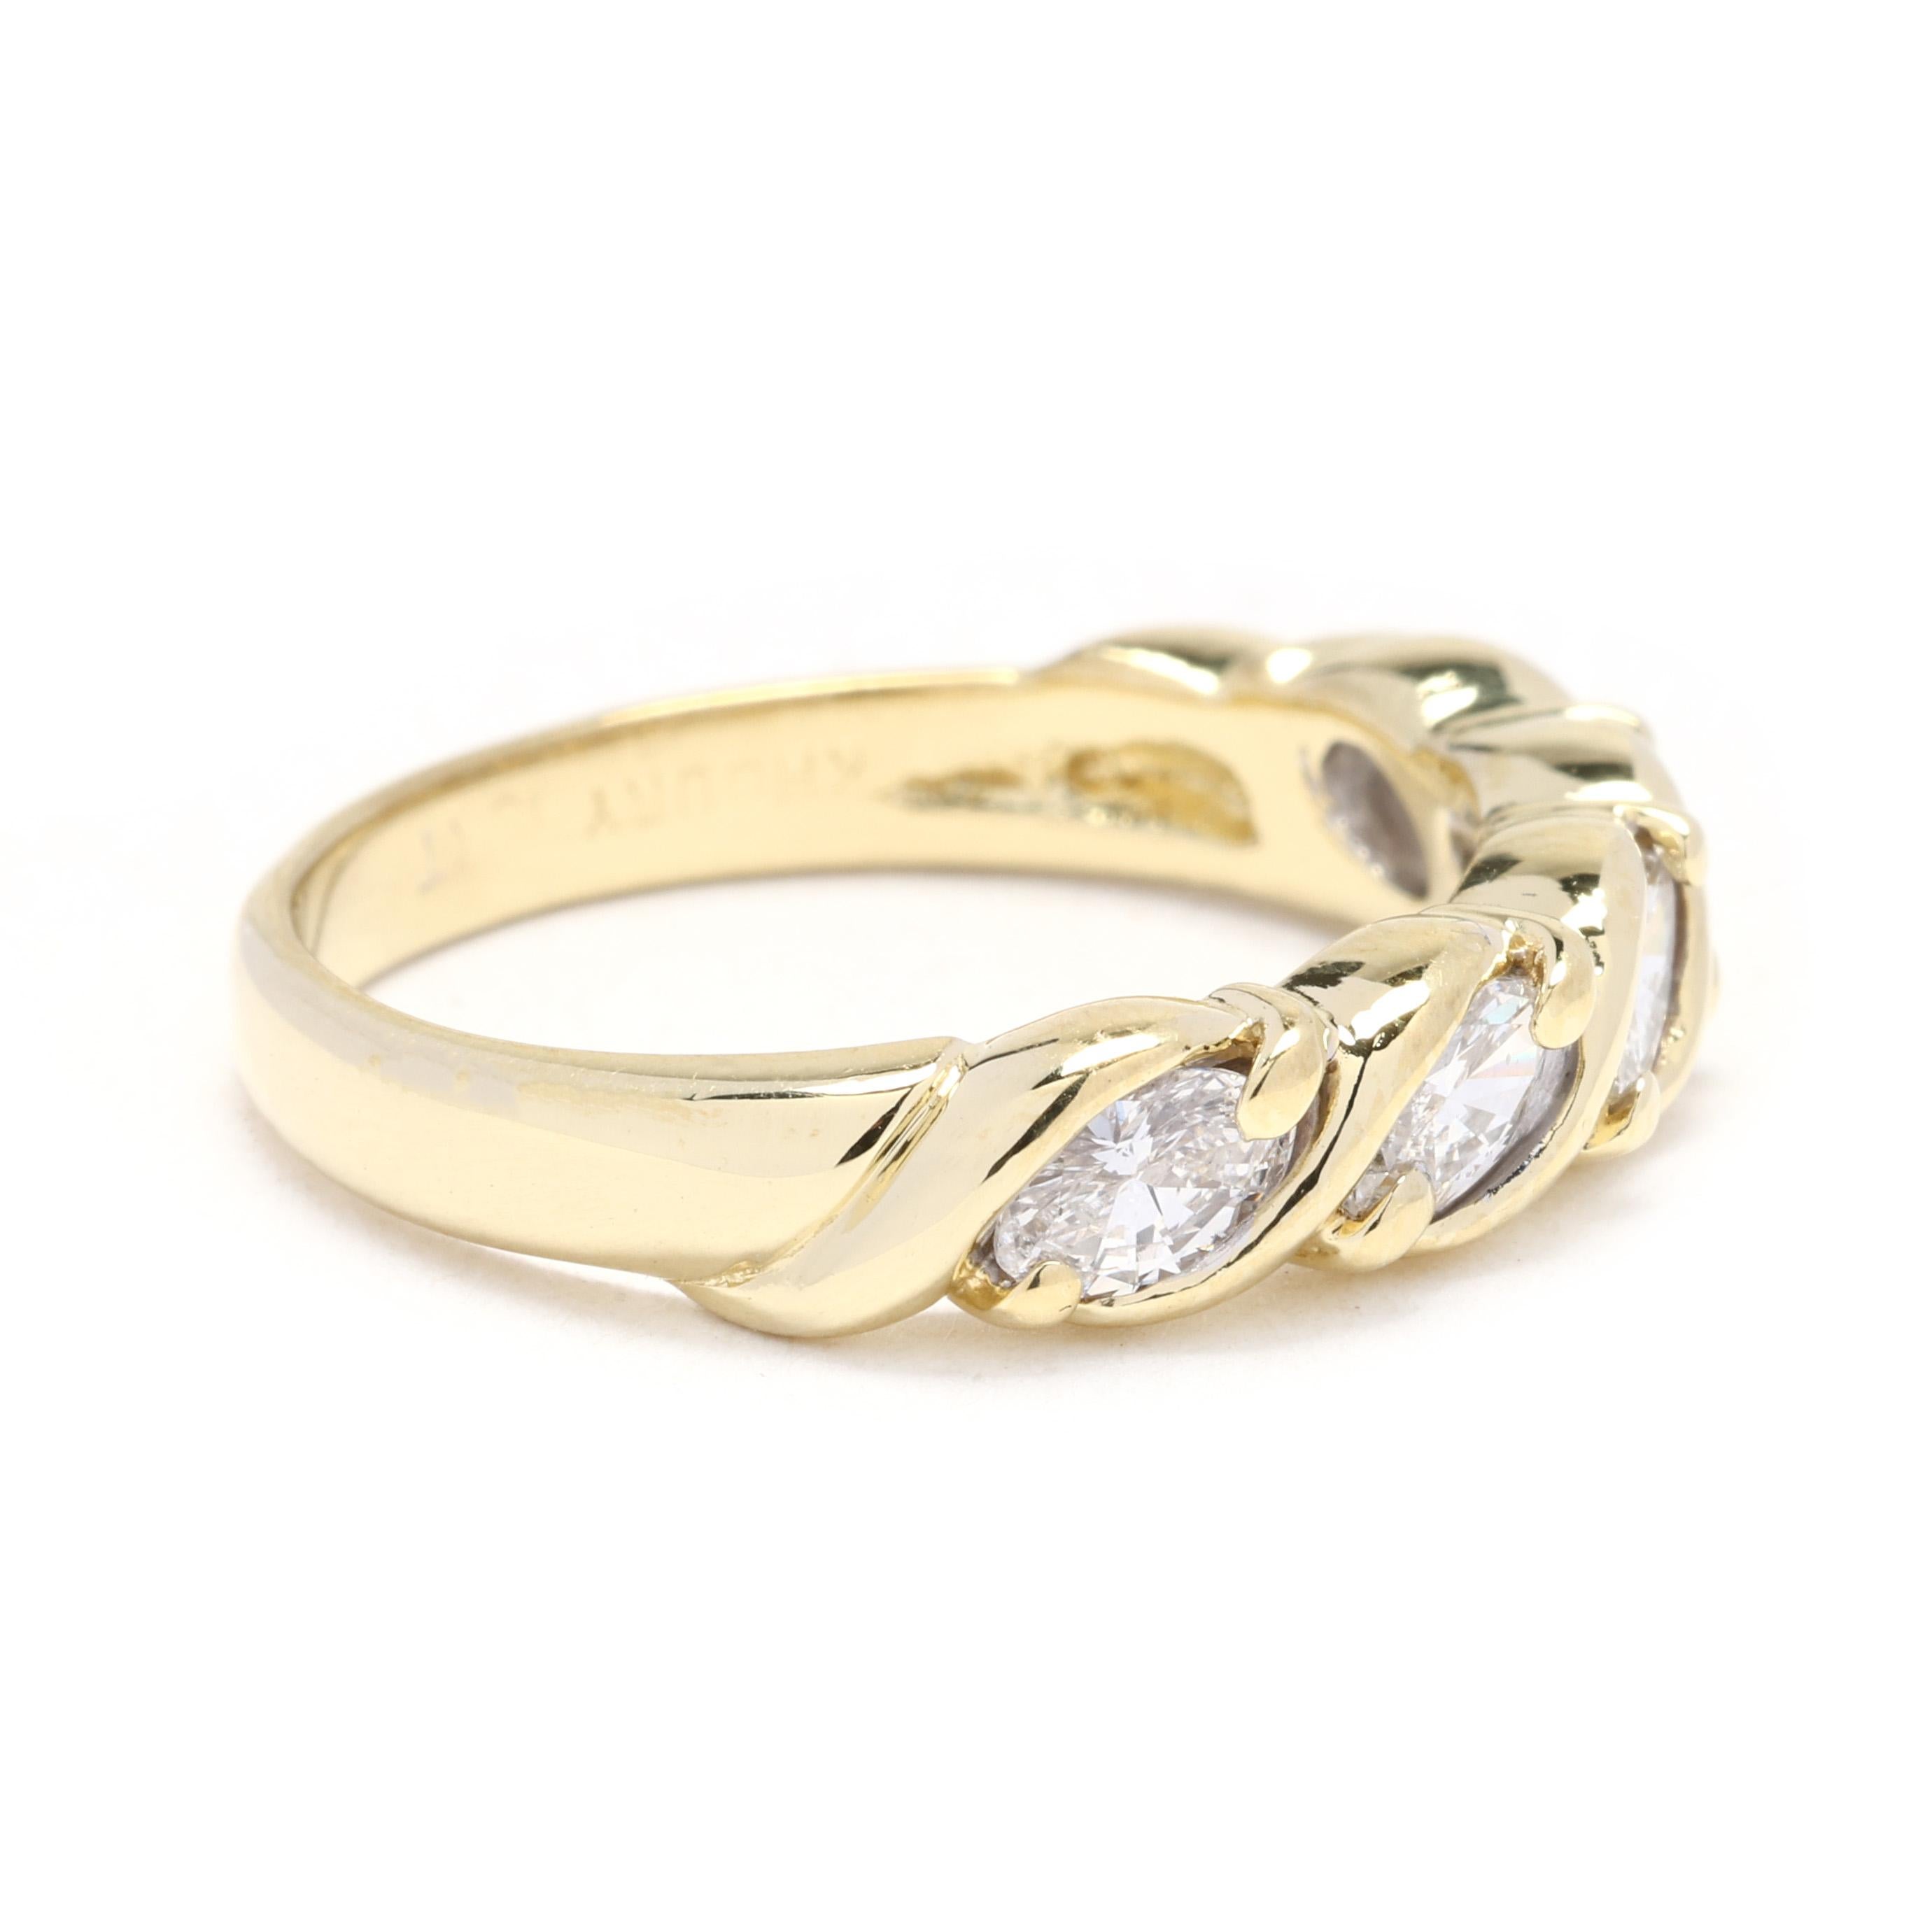 This timeless band ring is crafted with 18k yellow gold and features a stunning display of marquise-cut diamonds. With a total carat weight of 0.75, the diamonds are prong-set to ensure maximum brilliance and sparkle. The ring has a sleek and